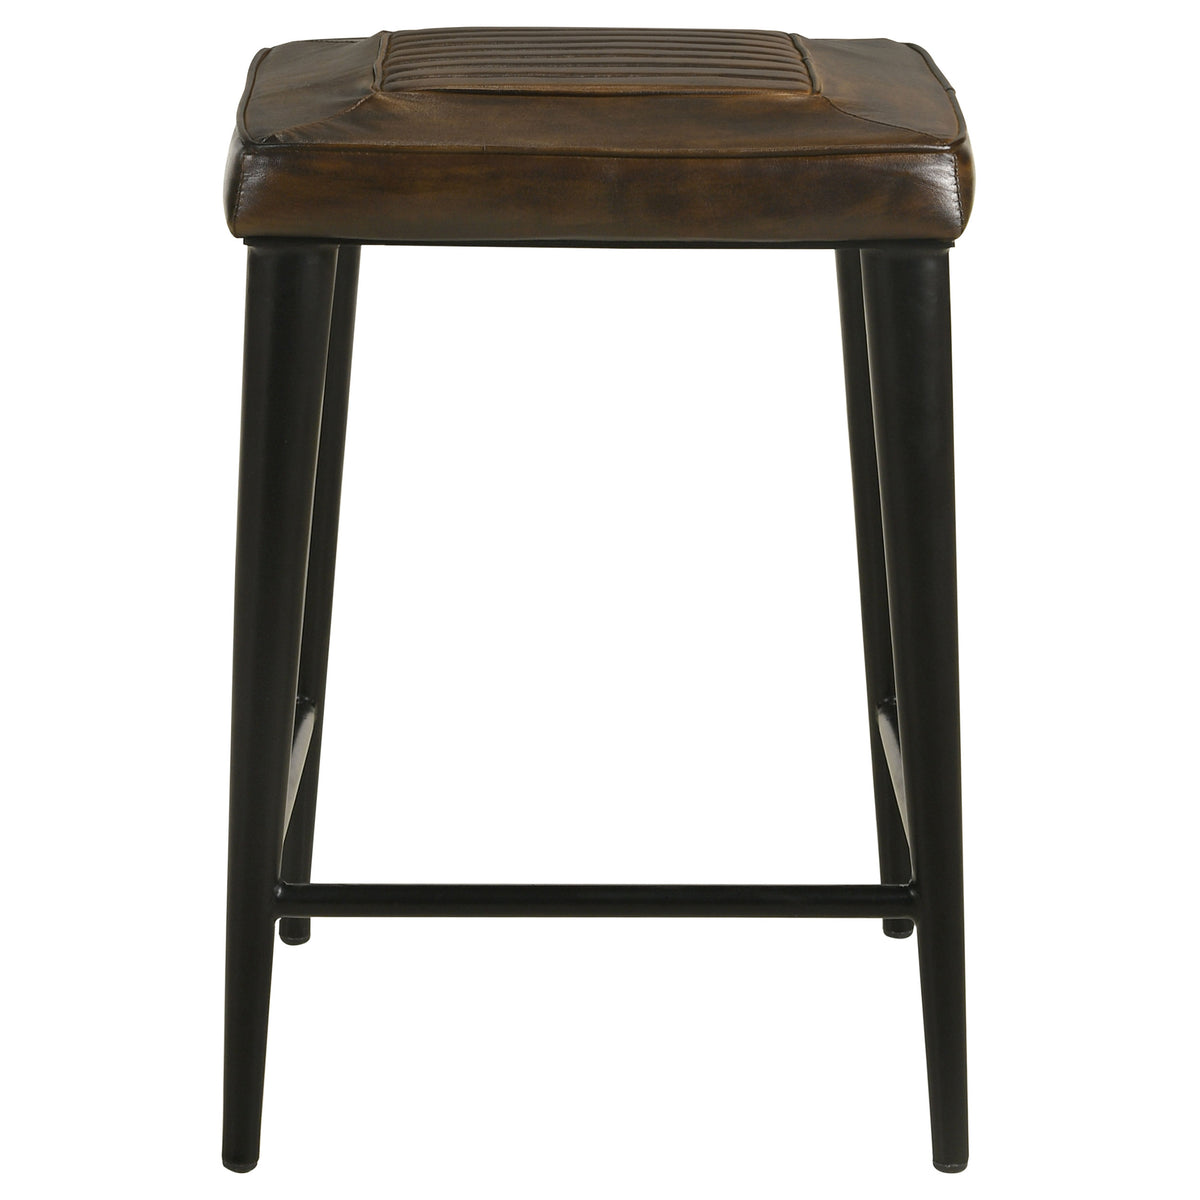 Alvaro Leather Upholstered Backless Counter Height Stool Antique Brown and Black (Set of 2)  Las Vegas Furniture Stores